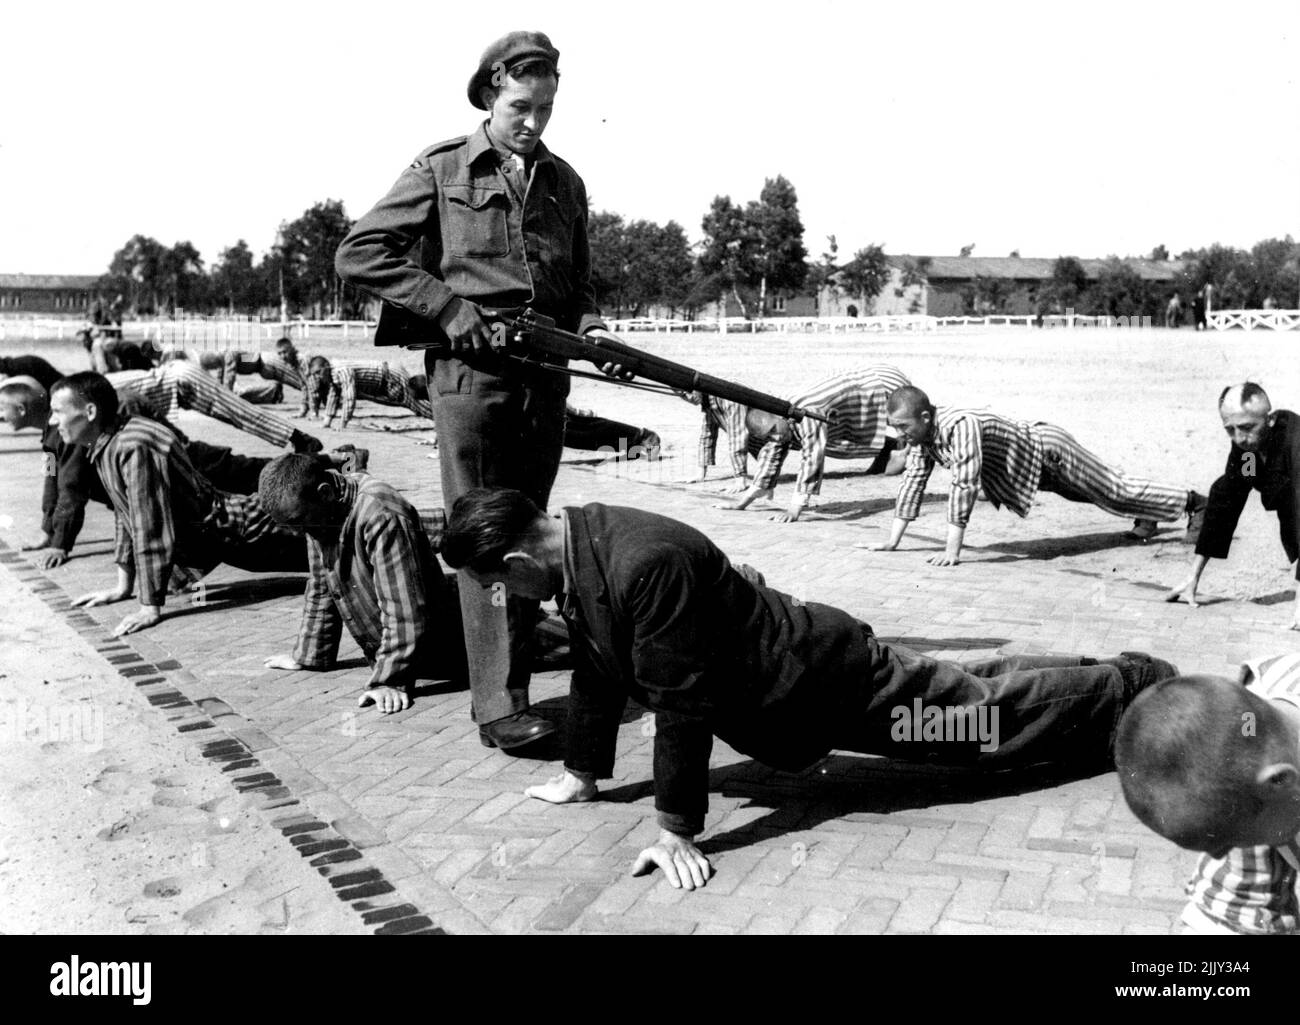 A soldier of the Netherland forces who has been an unwilling prisoner in the concentration camp, discoveres a Dutch Waffen S.S. man who was a guard during the German occupation. After the notorious concentration-camp Vught (in the Southern part of the Netherlands) had been liberated by the allied arrives, it has become a camp for Dutch collaborators are now in that camp. 300 Belong to the 'Netherlands Waffen S.S.' They are dressed in the same prisonsuits as formerly the underground resistant members were put-in after ***** been transported to Vught. June 01, 1945. (Photo by Anefo). Stock Photo